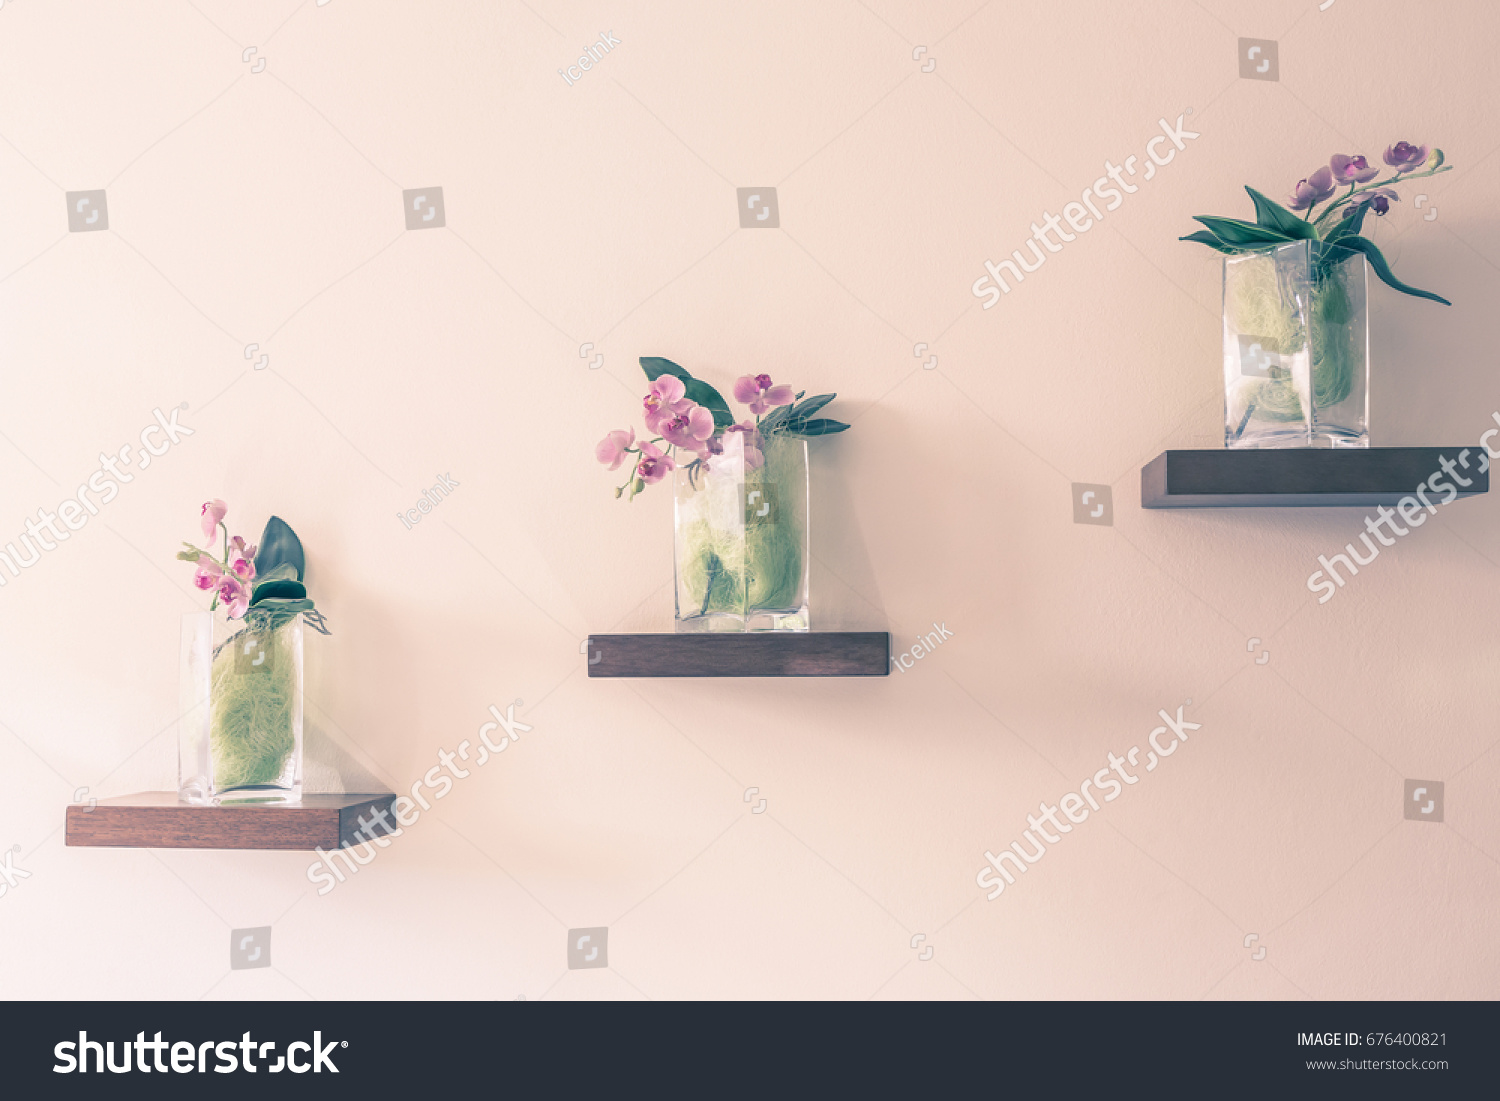 Beautiful orchid in glass vase on shelf on the wall background. Vintage color tone. #676400821